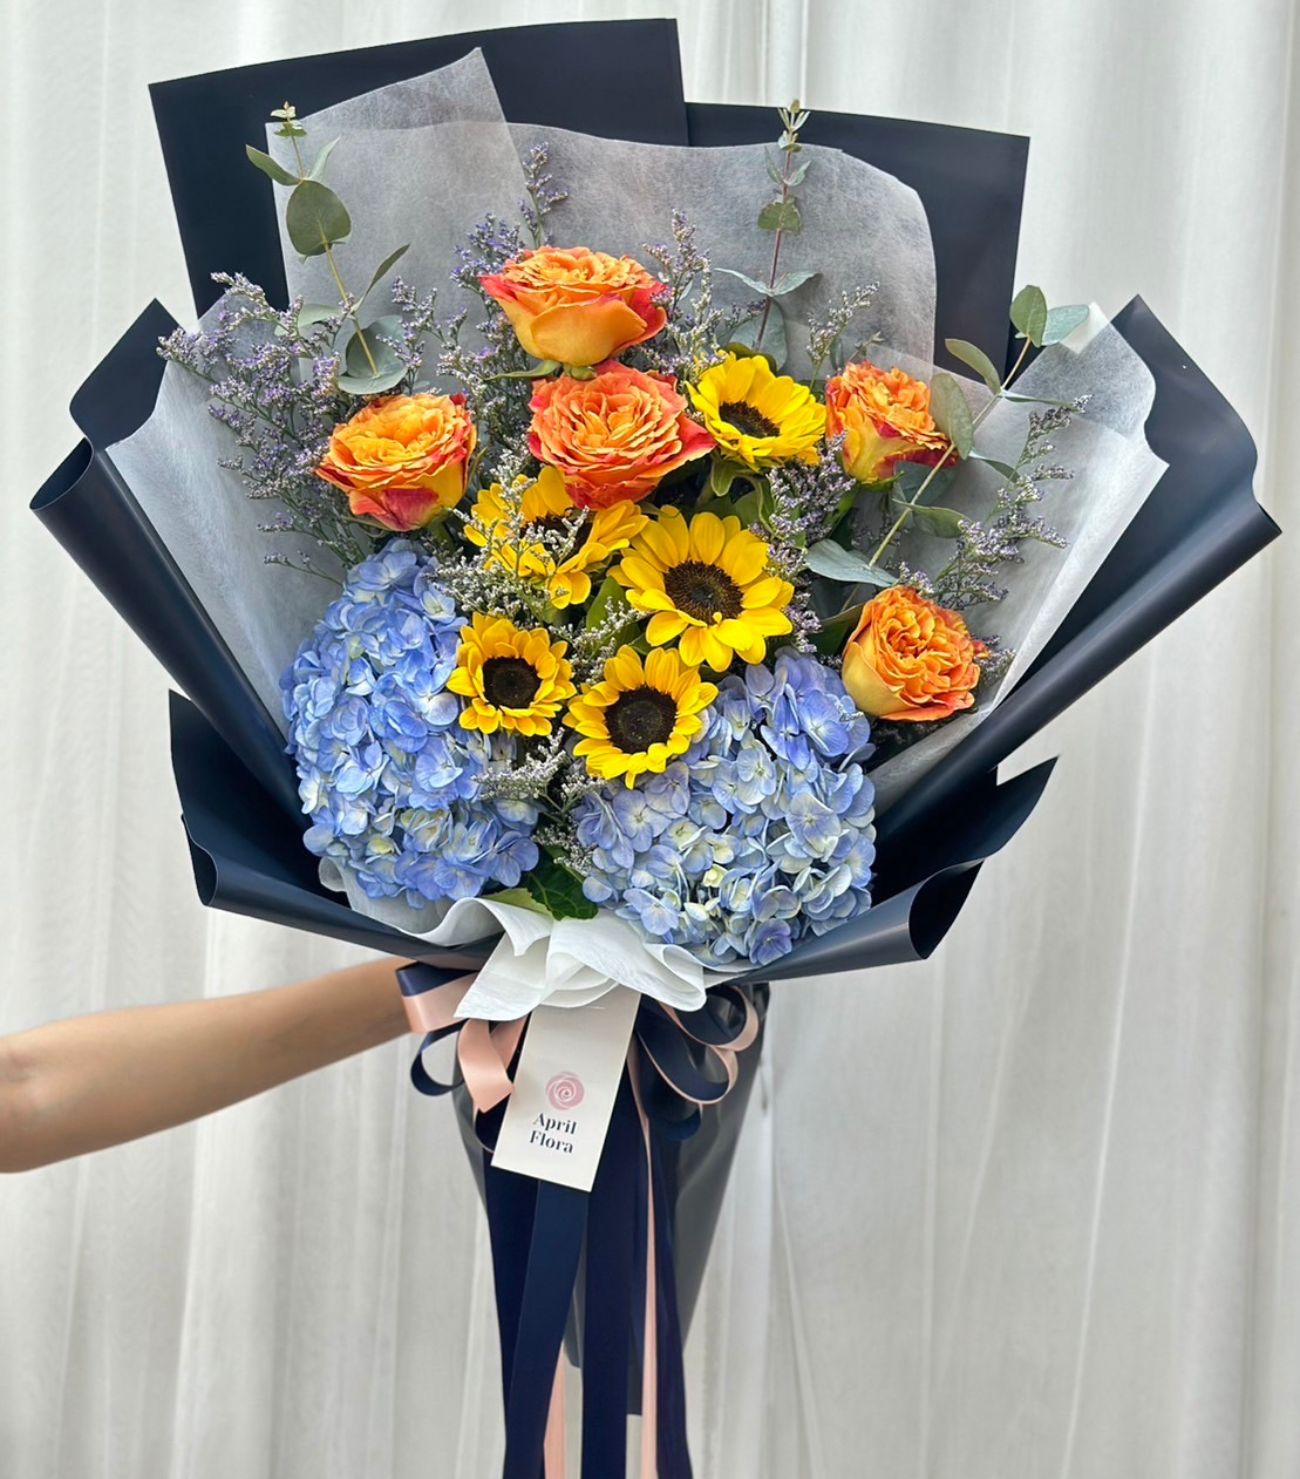 Art Bouquet With Sunflowers, Roses And Hydrangea